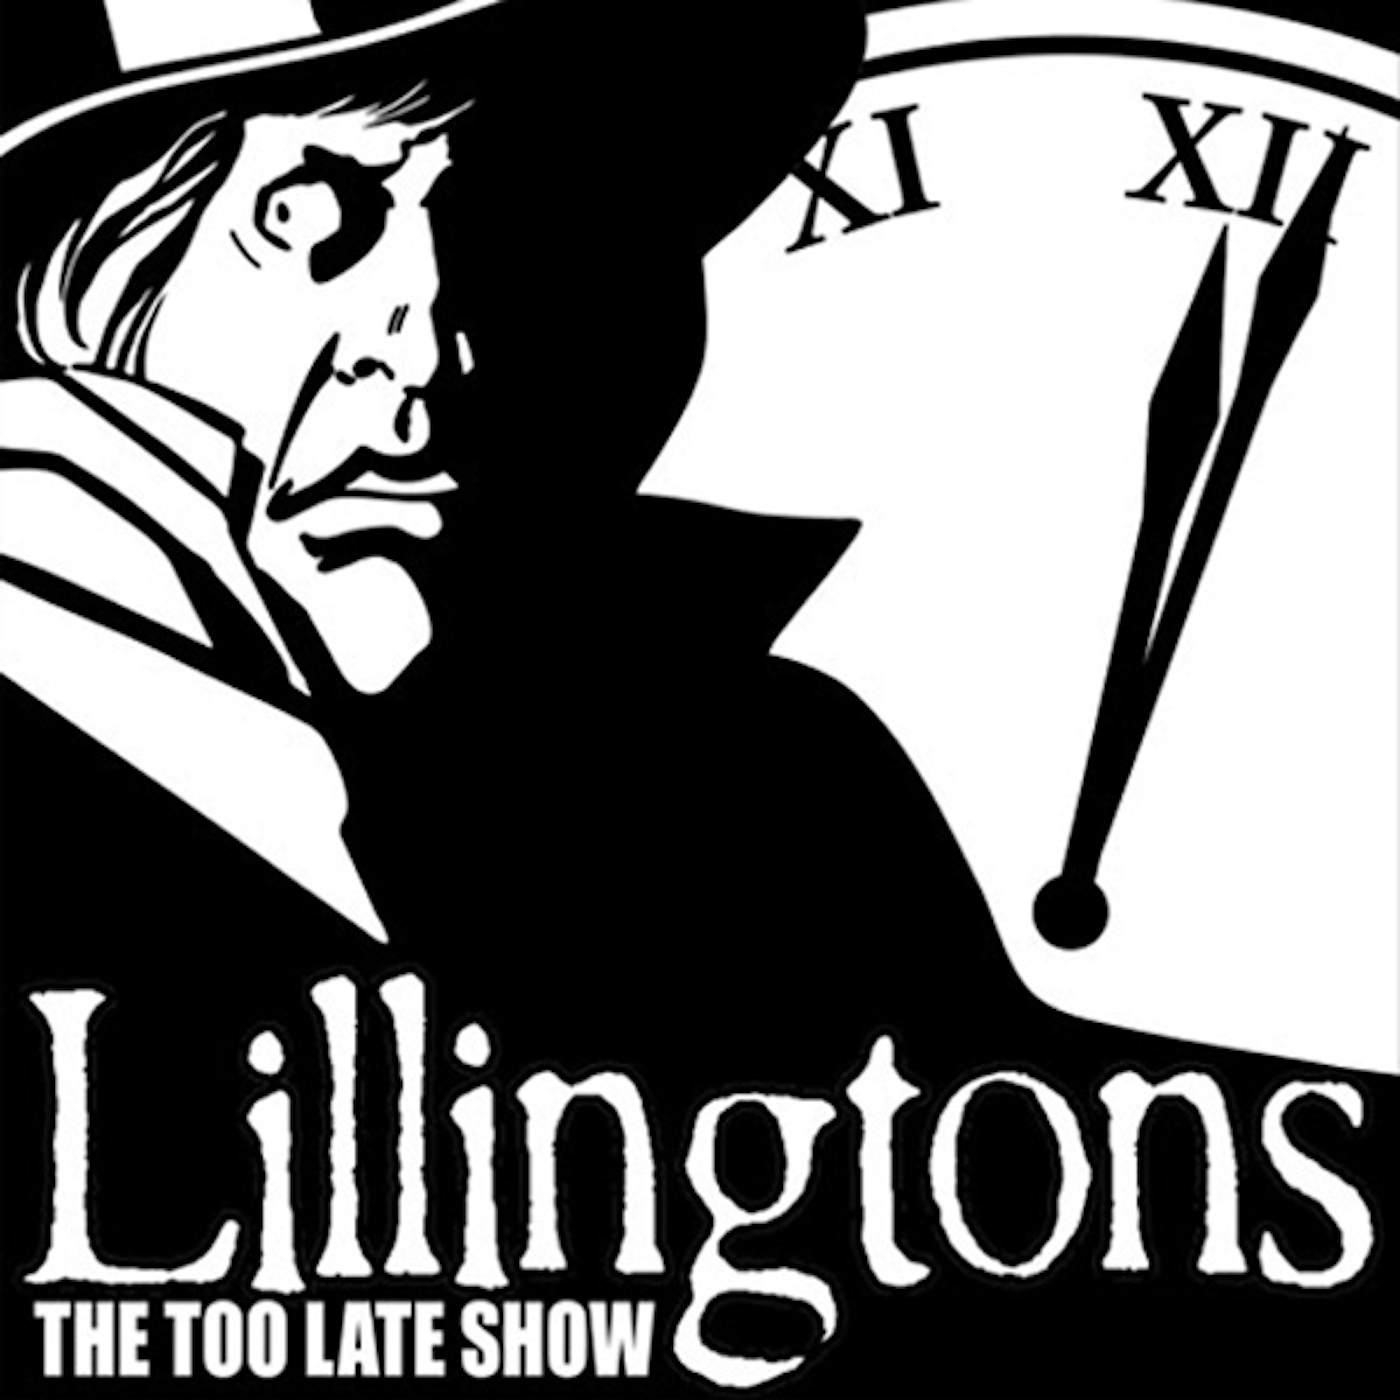 The Lillingtons TOO LATE SHOW Vinyl Record